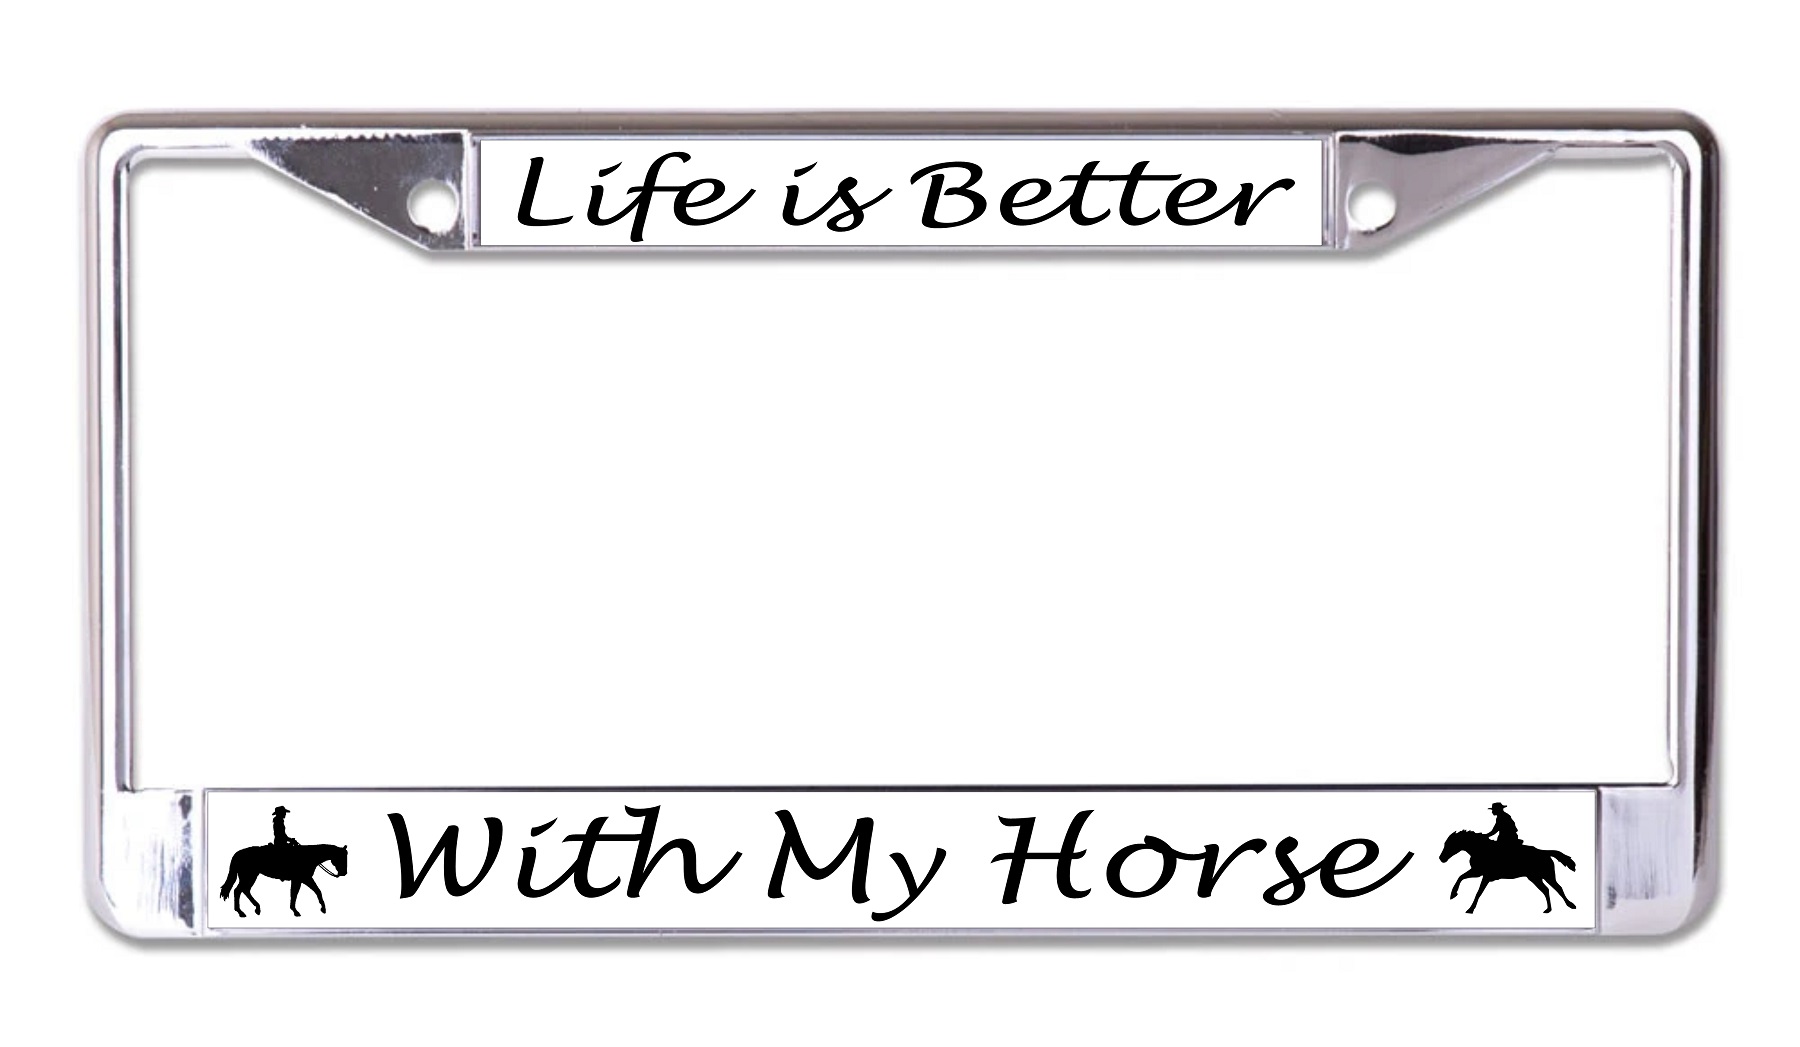 License Plates Online Life Is Better With My Horse Chrome License Plate Frame